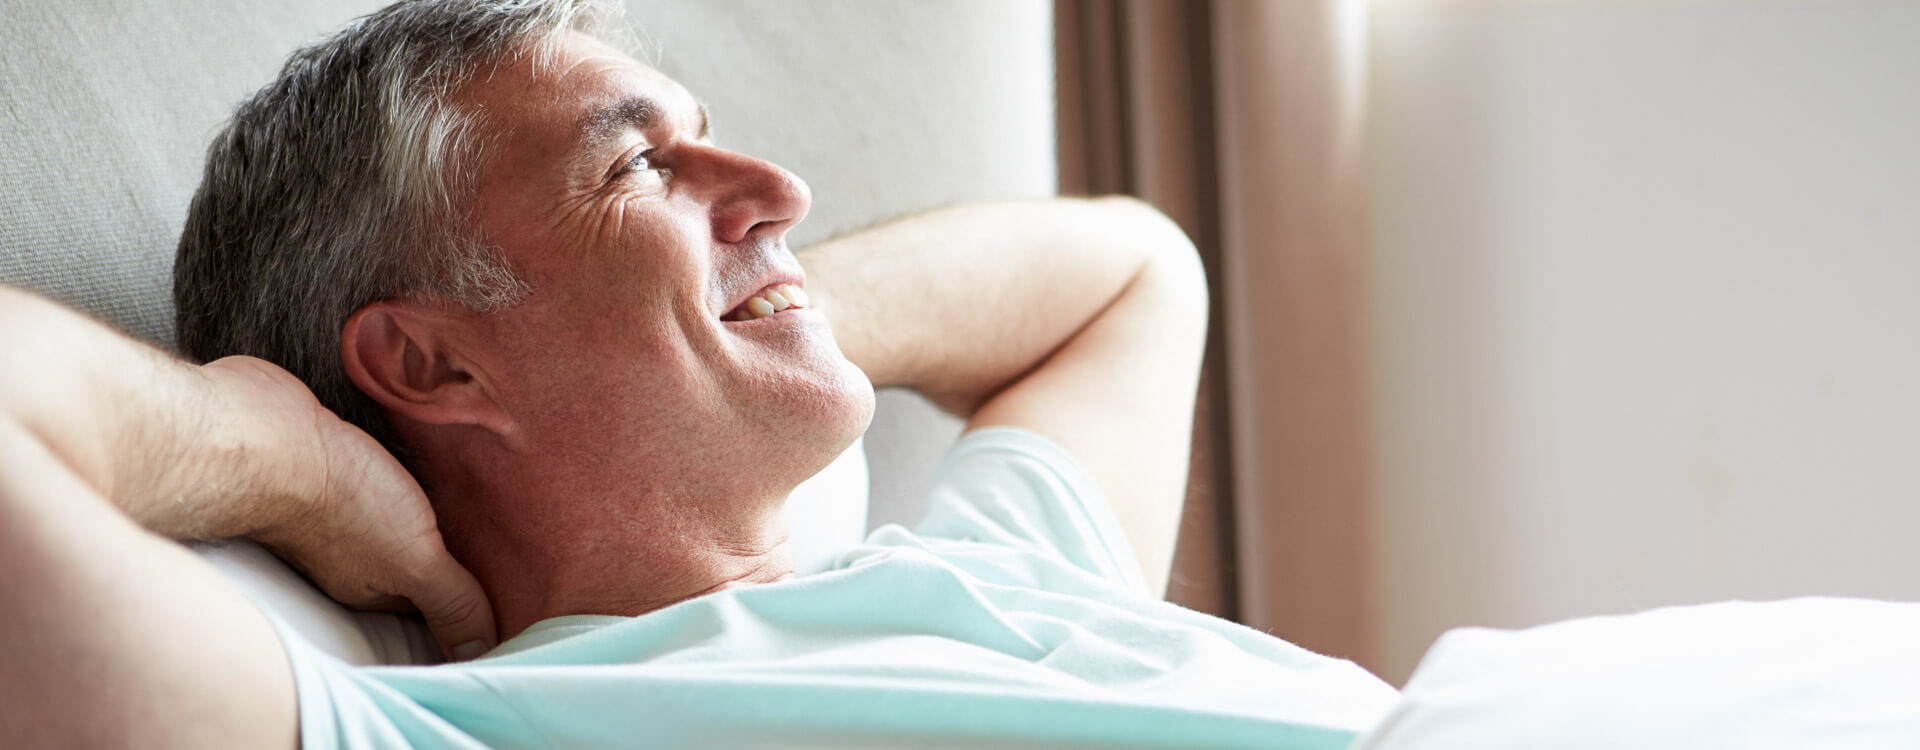 Middle-aged man relaxing and smiling